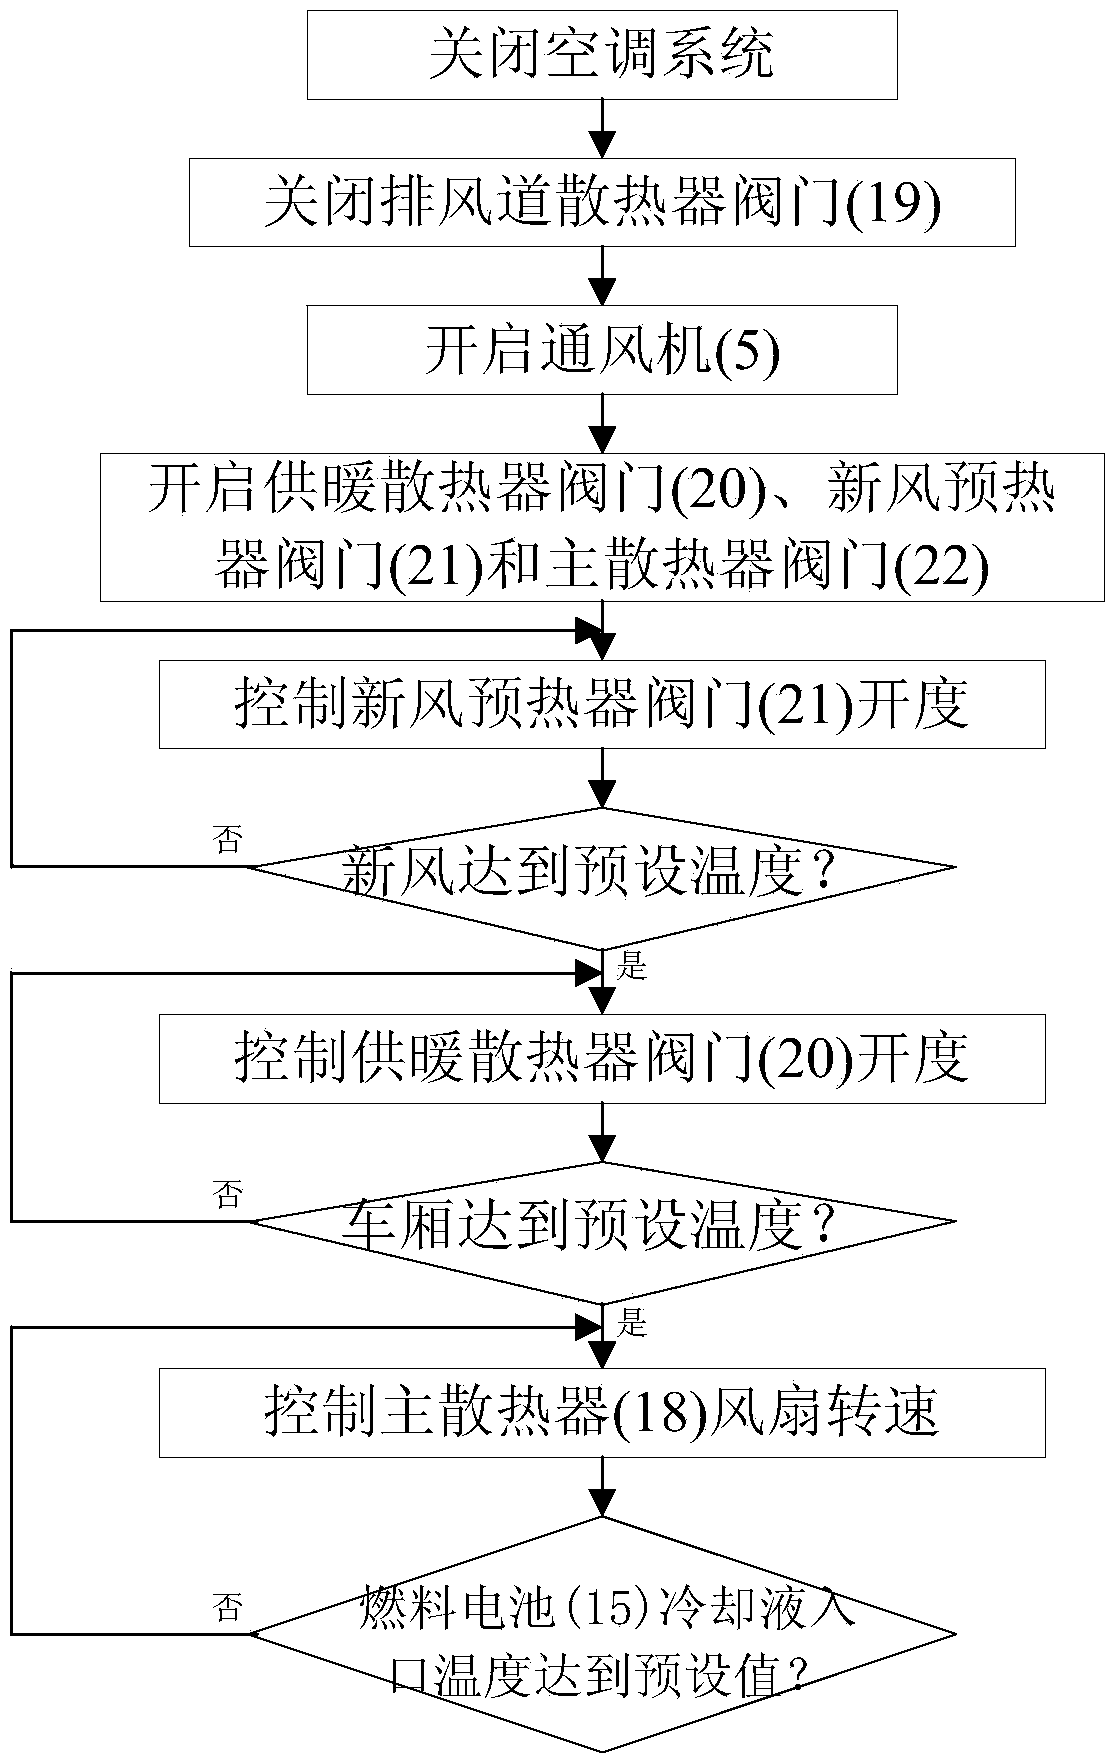 Fuel cell tramcar heat comprehensive utilization method and device